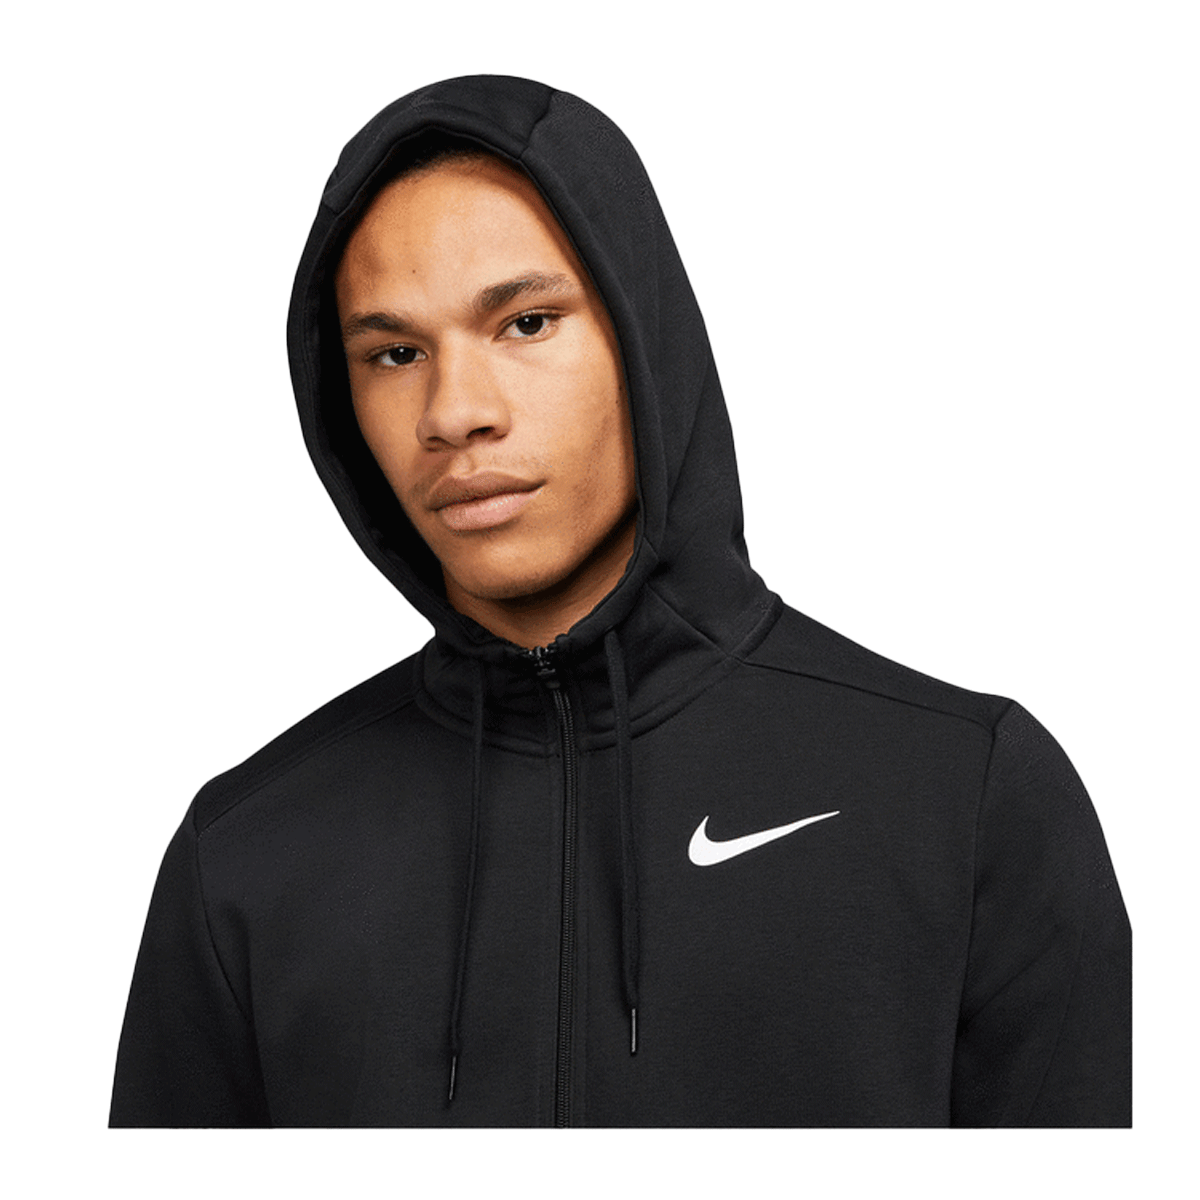 LEEy-world Cool Mens Hoodies Men's Sports Casual Full Zipper Long-Sleeved  Hooded Sweater with Pockets Jogging Track and Filed Gym Training Hoodie  Dark